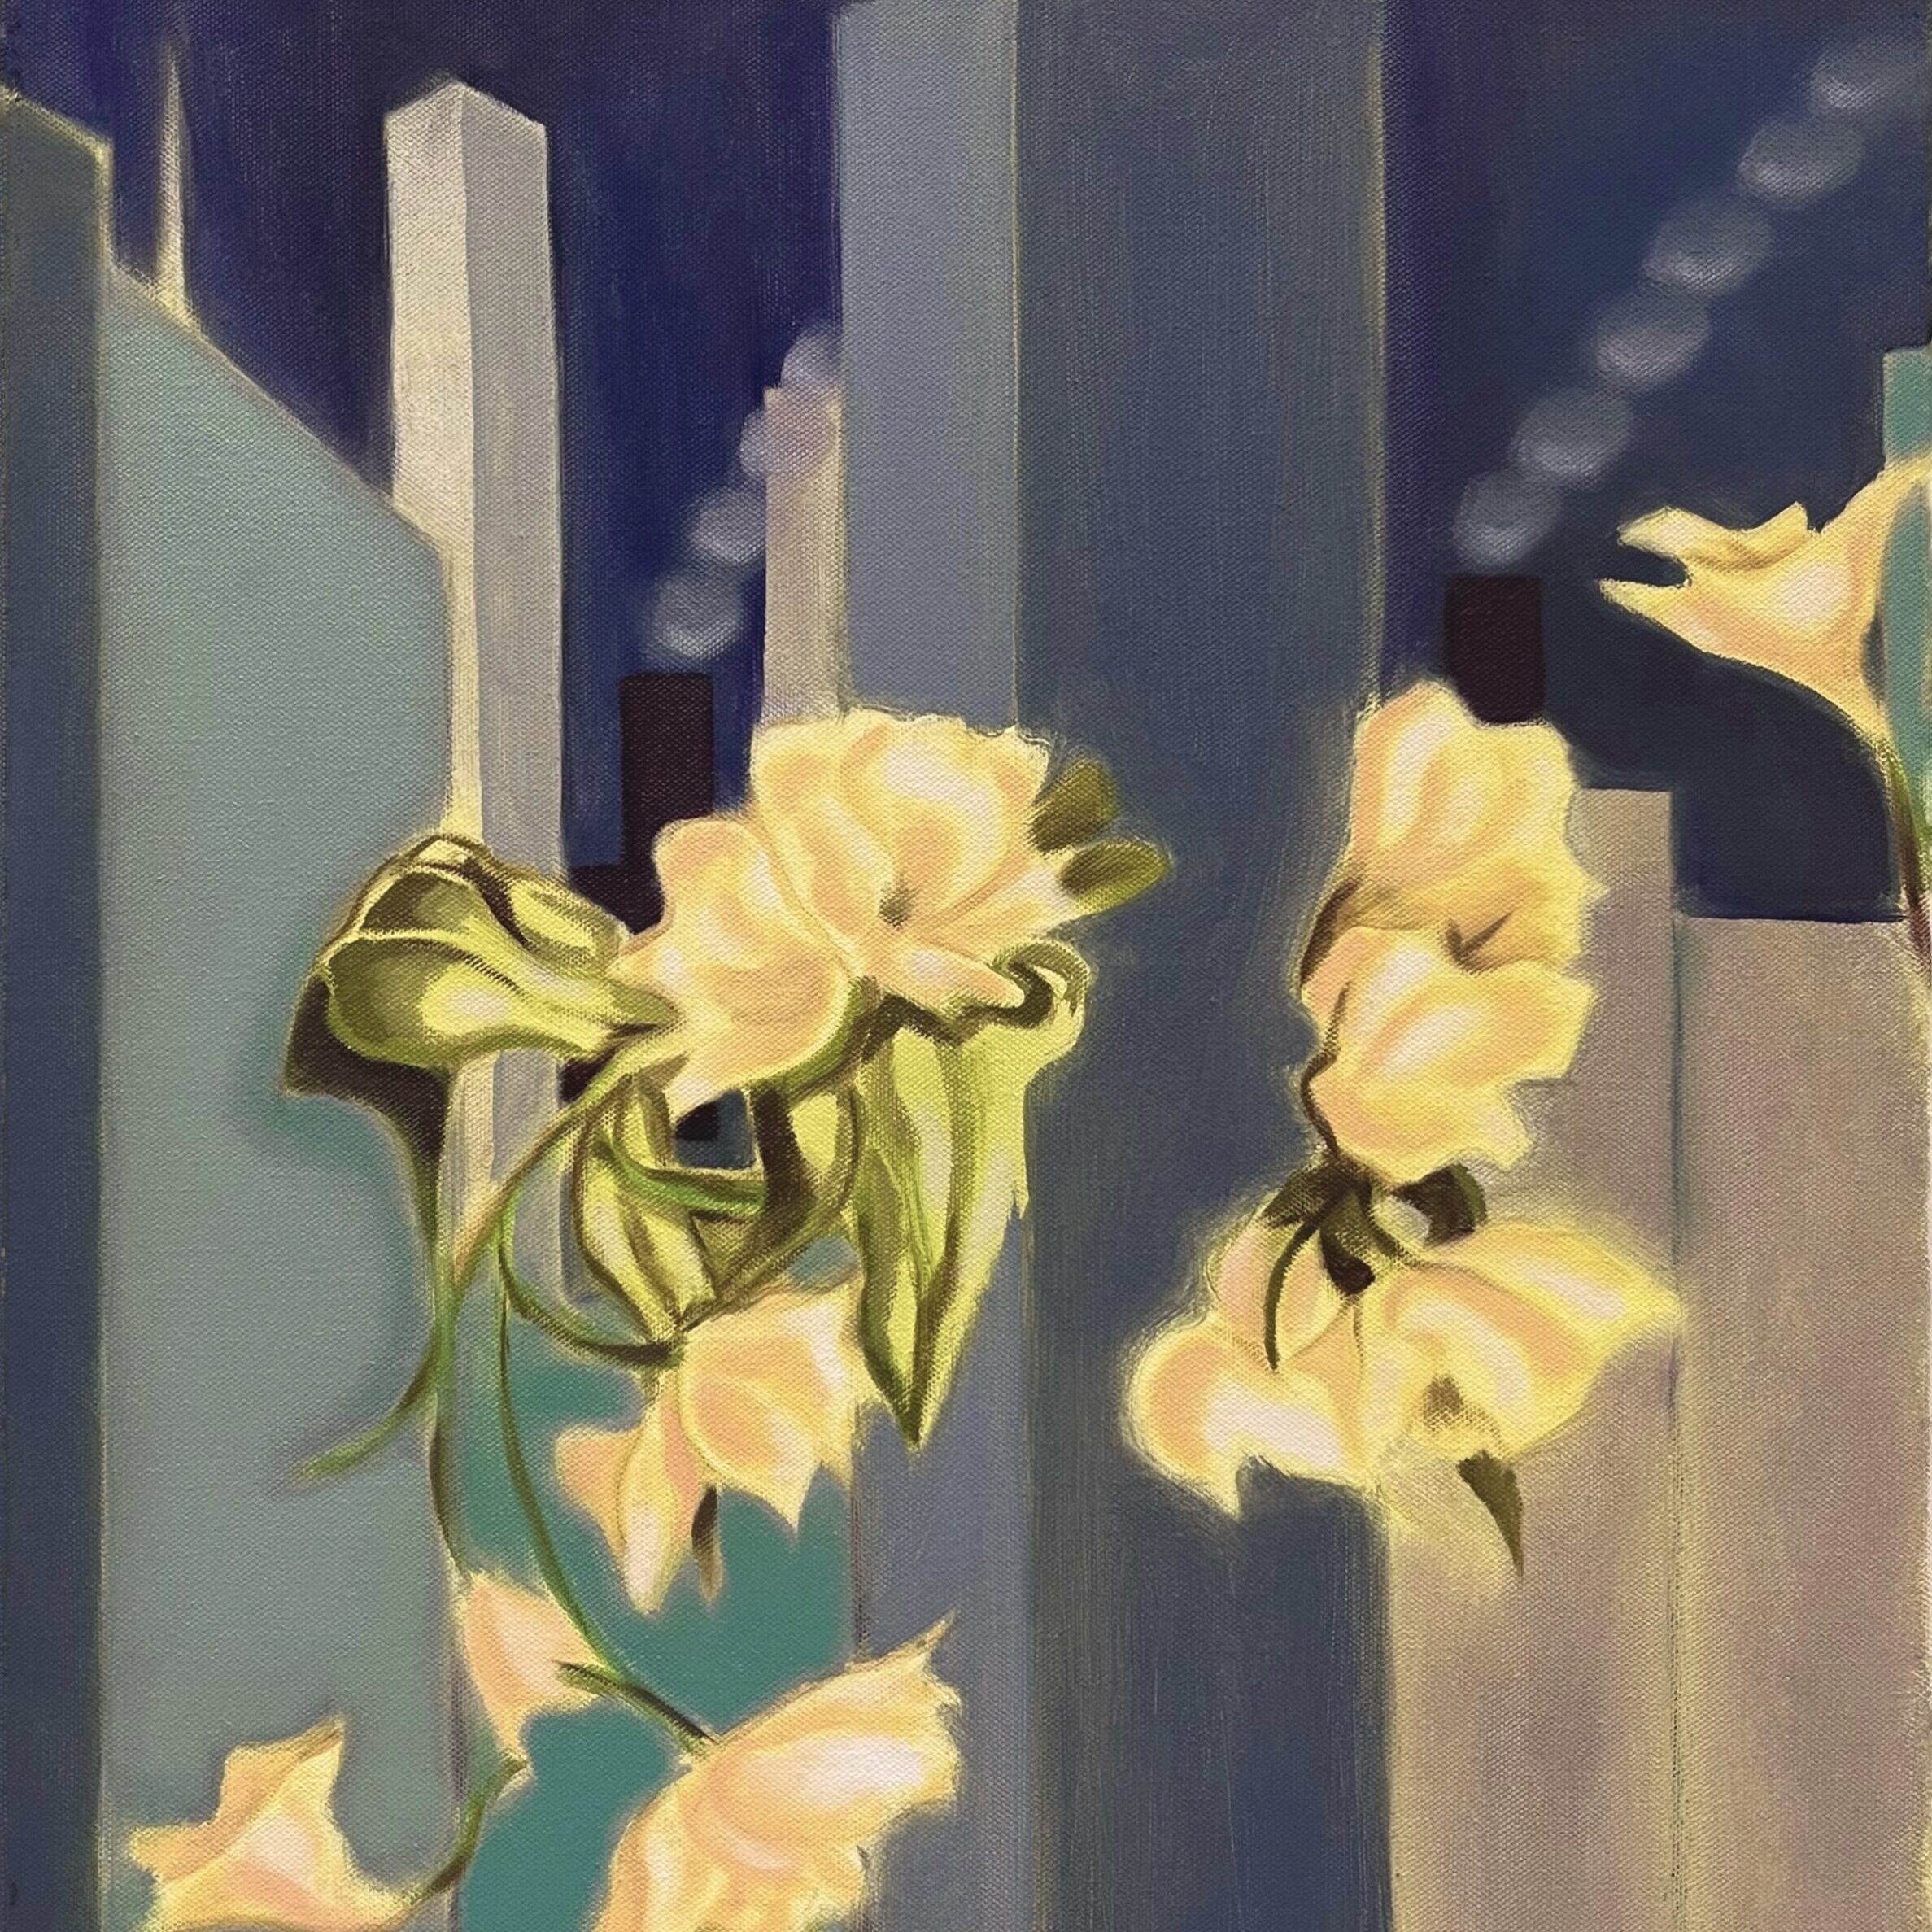 Beautiful golden flowers bloom from columns against a background of blocks and architecture.